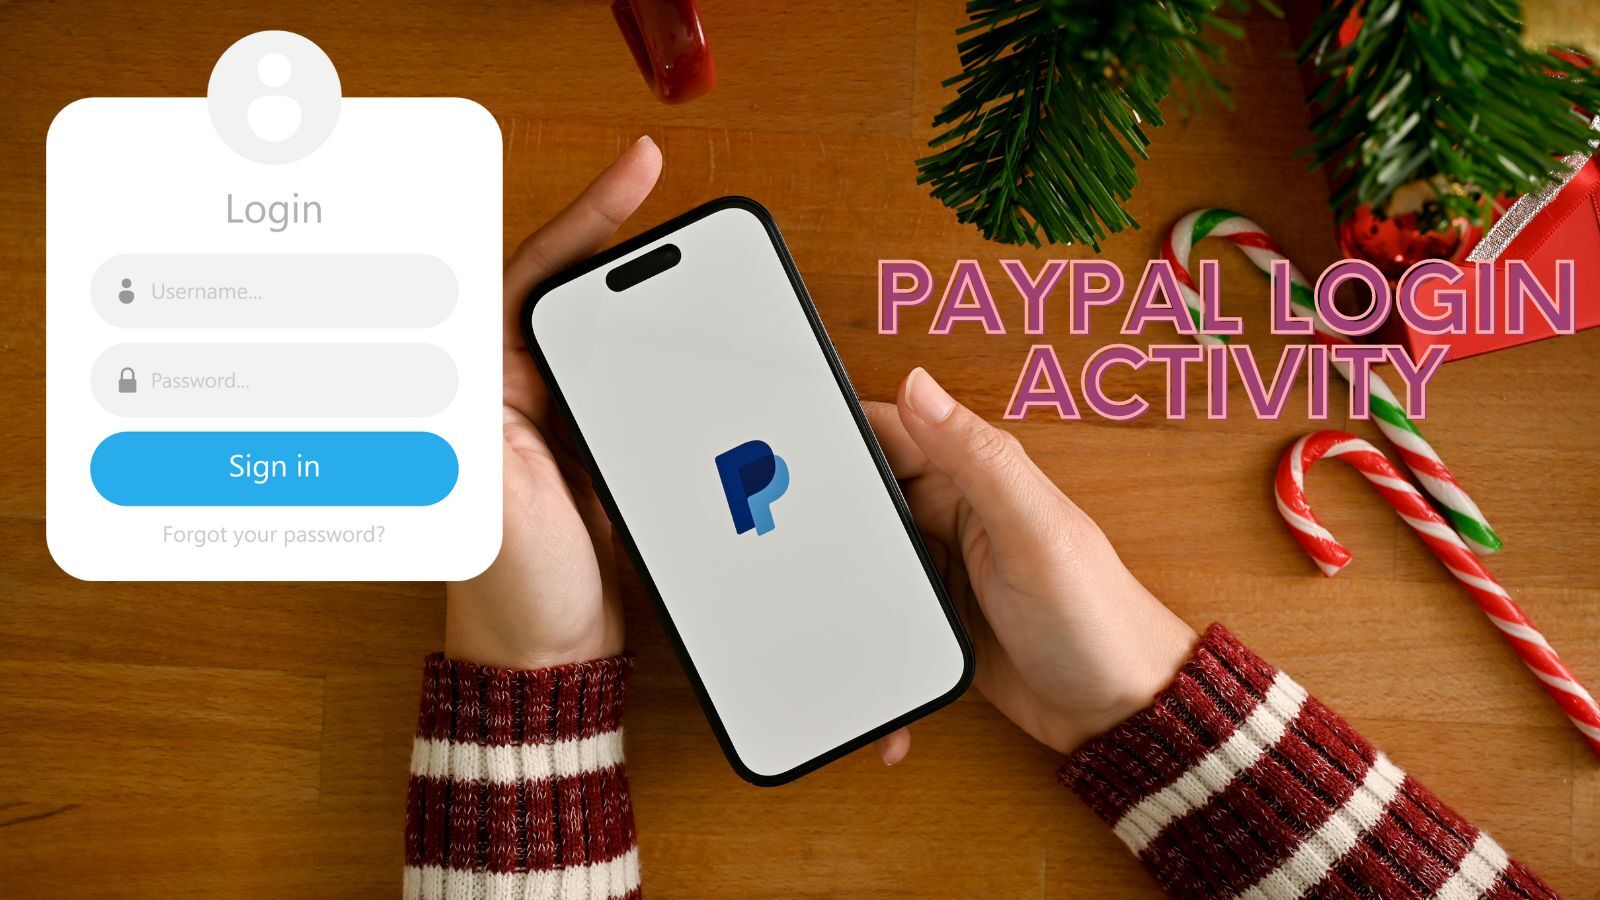 Can I View My Paypal Login Activity? (A Step-by-Step Guide)